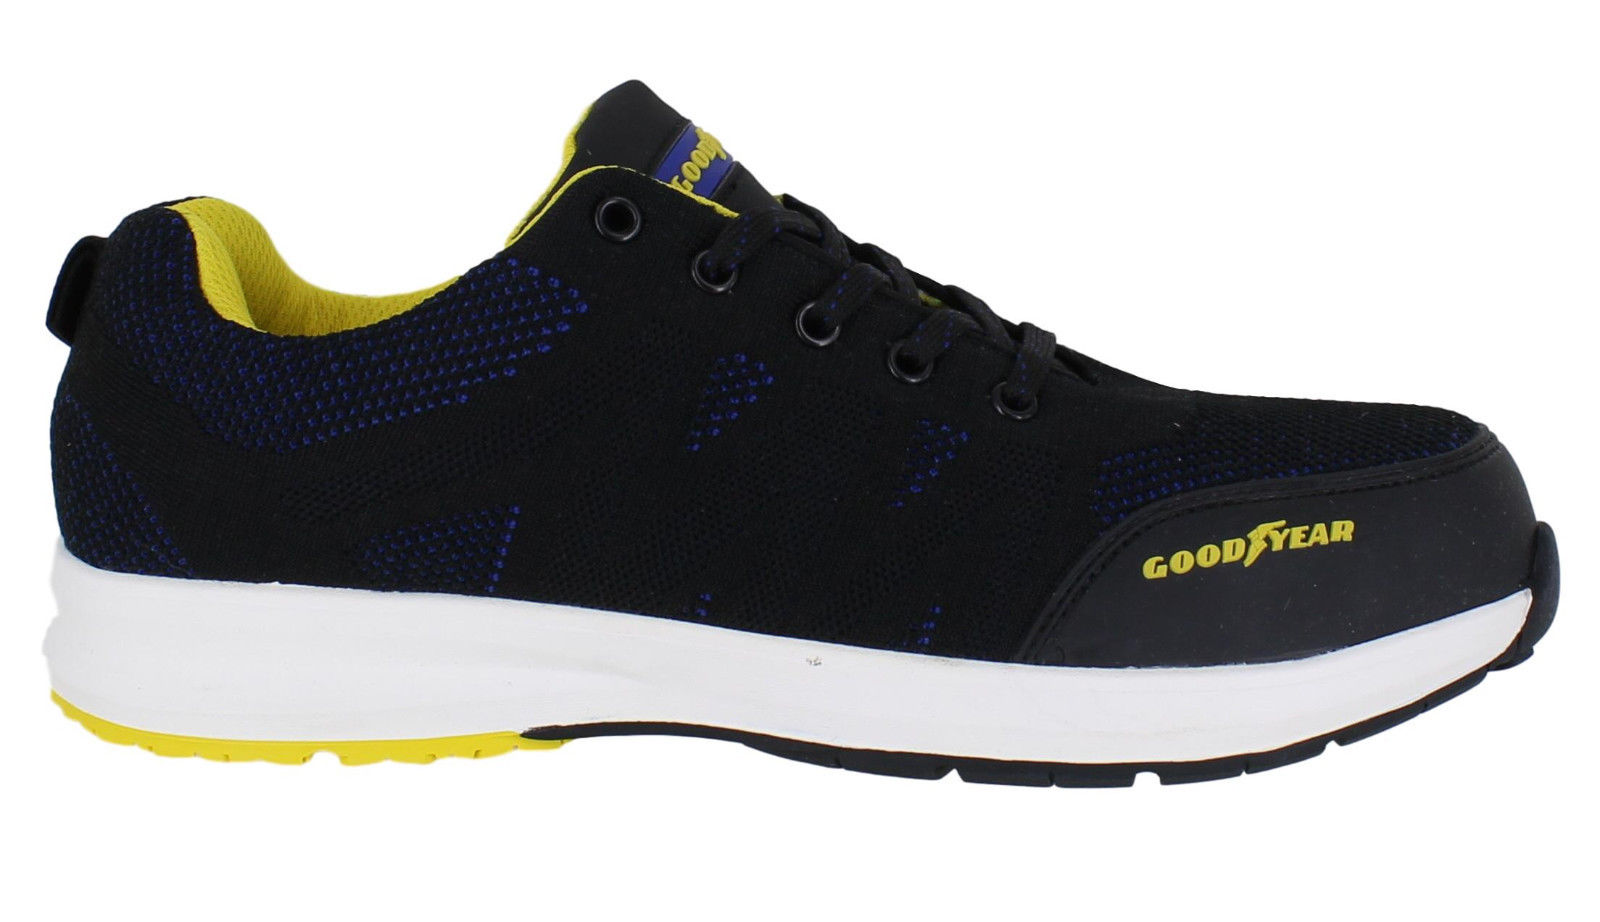 Mens Goodyear Composite Toe/Midsole S1P SRC Safety Work Trainers Sizes 7 to 12 | eBay